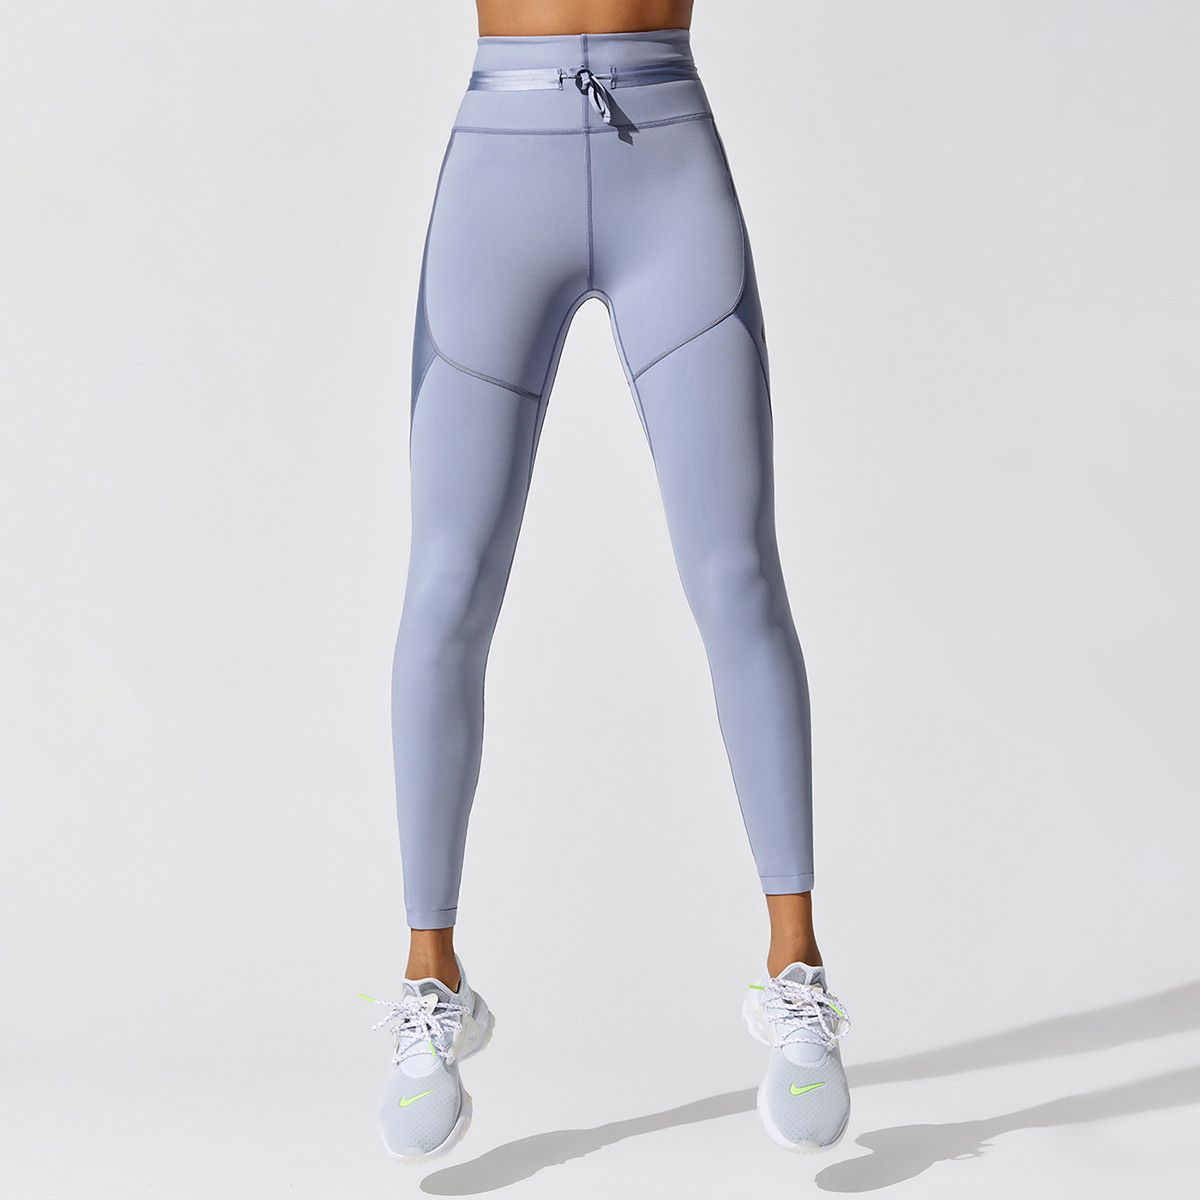 How to Style Nike Running Tights: Best 13 Sporty Outfit Ideas for Women